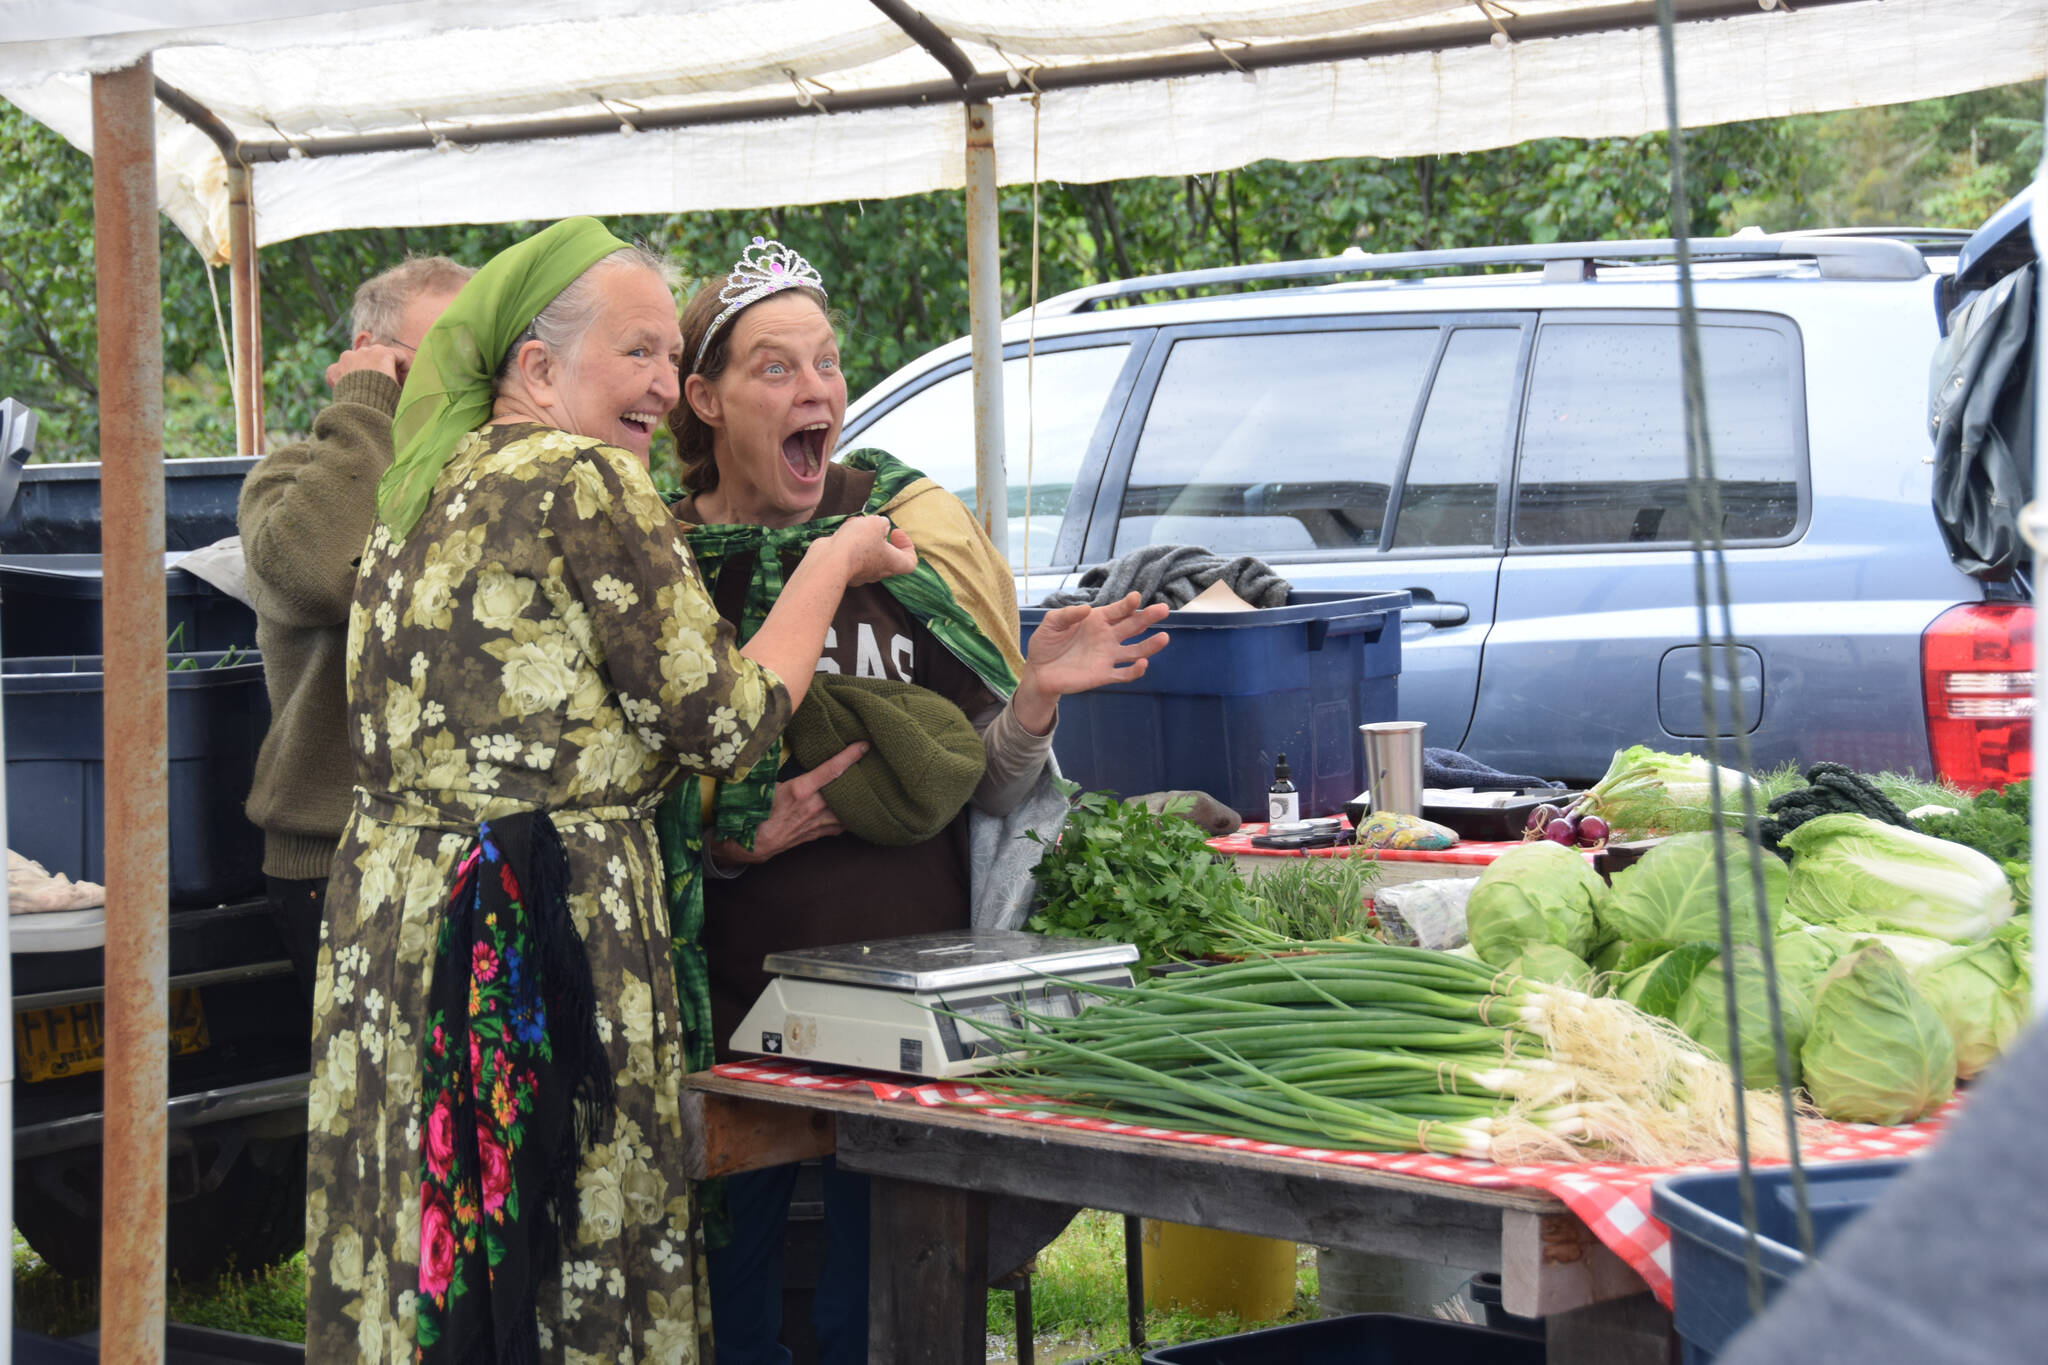 Jen Castellani from Will Grow Farm (right) is crowned the new Zucchini Queenie by the former queen, Luba Dorvall from Luba’s Garden (left) at the Homer Farmers Market Zucchini Festival on Saturday, Aug. 26, 2023 in Homer, Alaska. (Delcenia Cosman/Homer News)